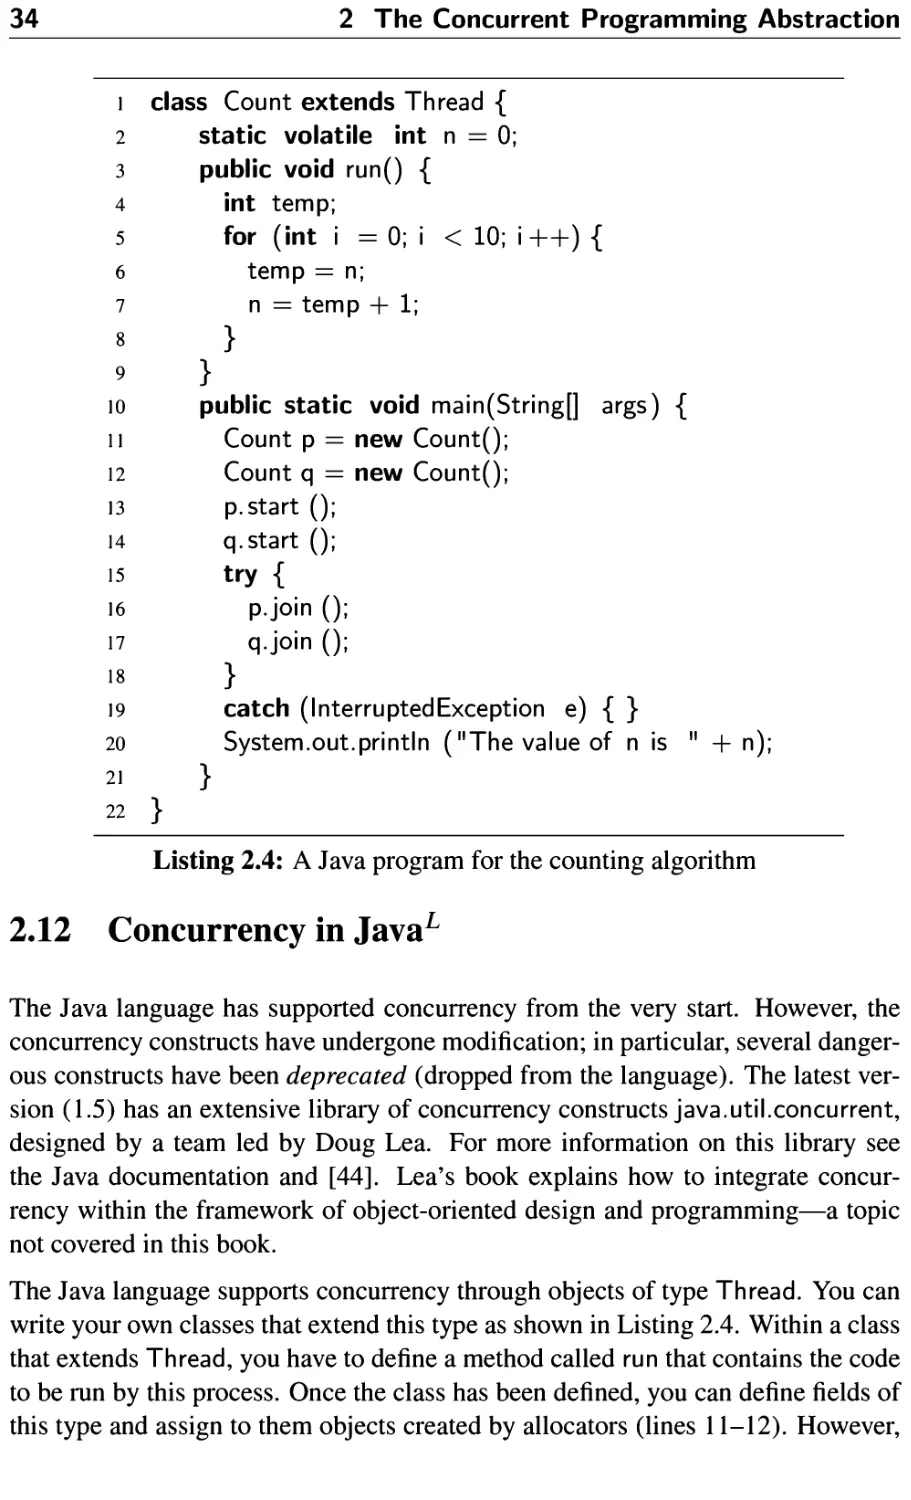 2.12 Concurrency in Java